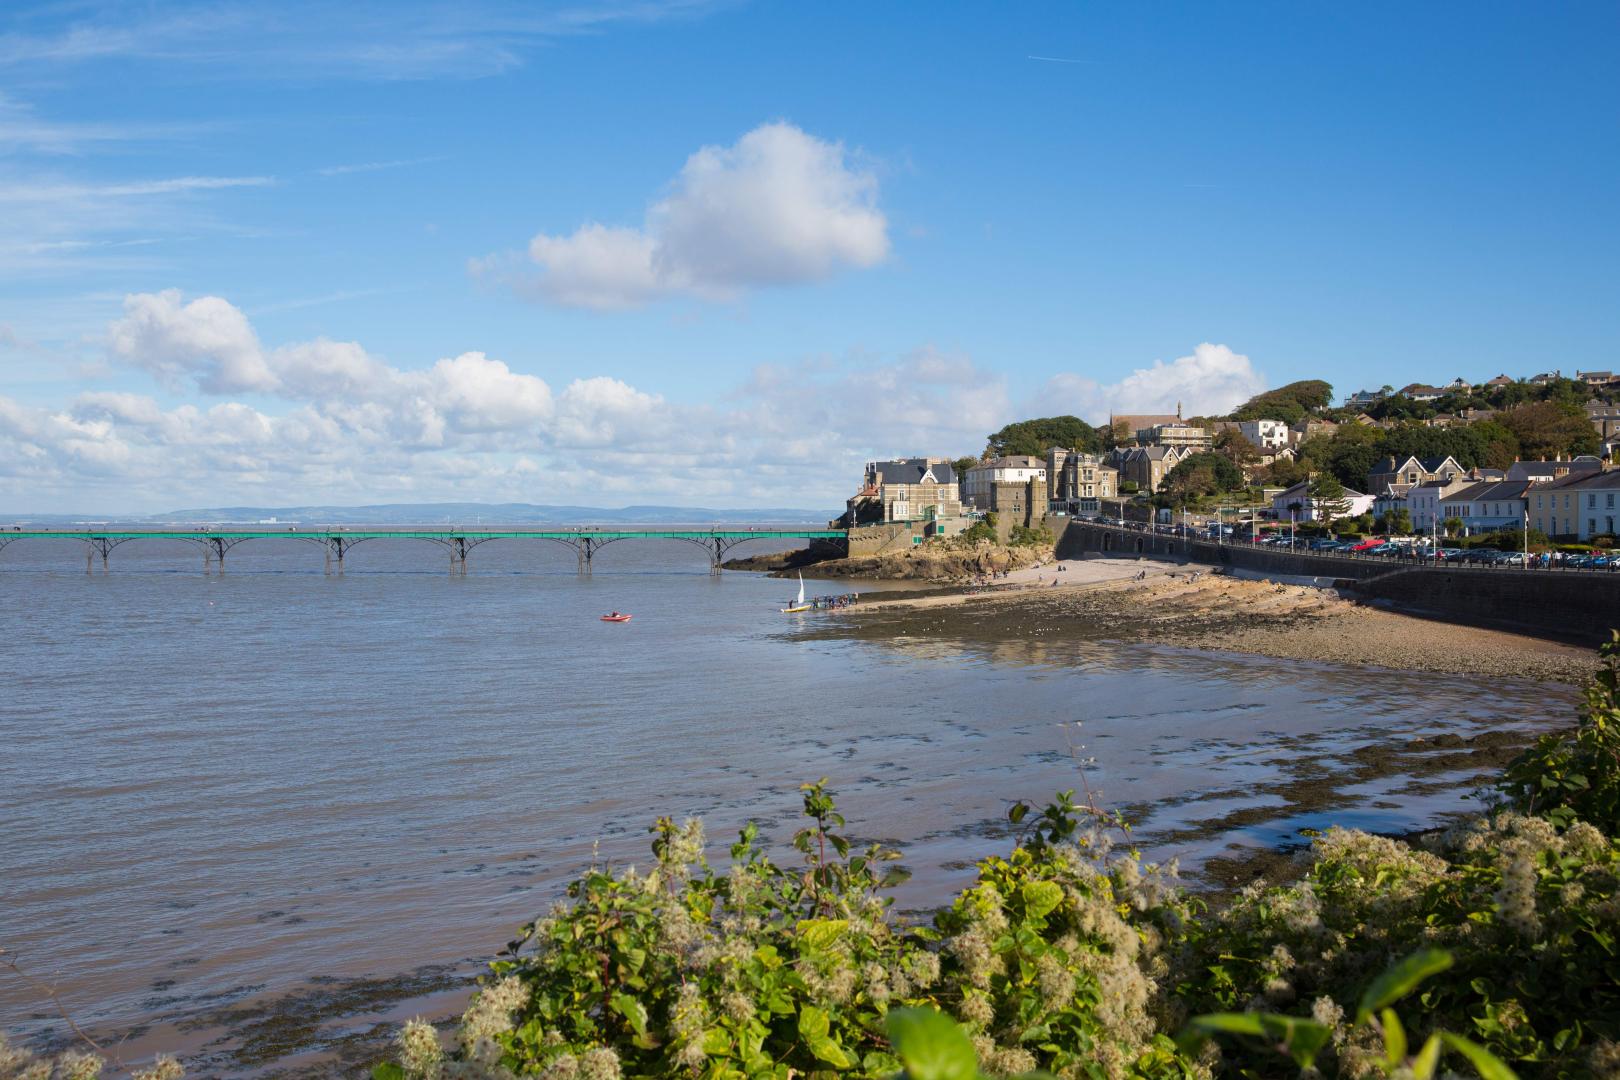 Clevedon seafront